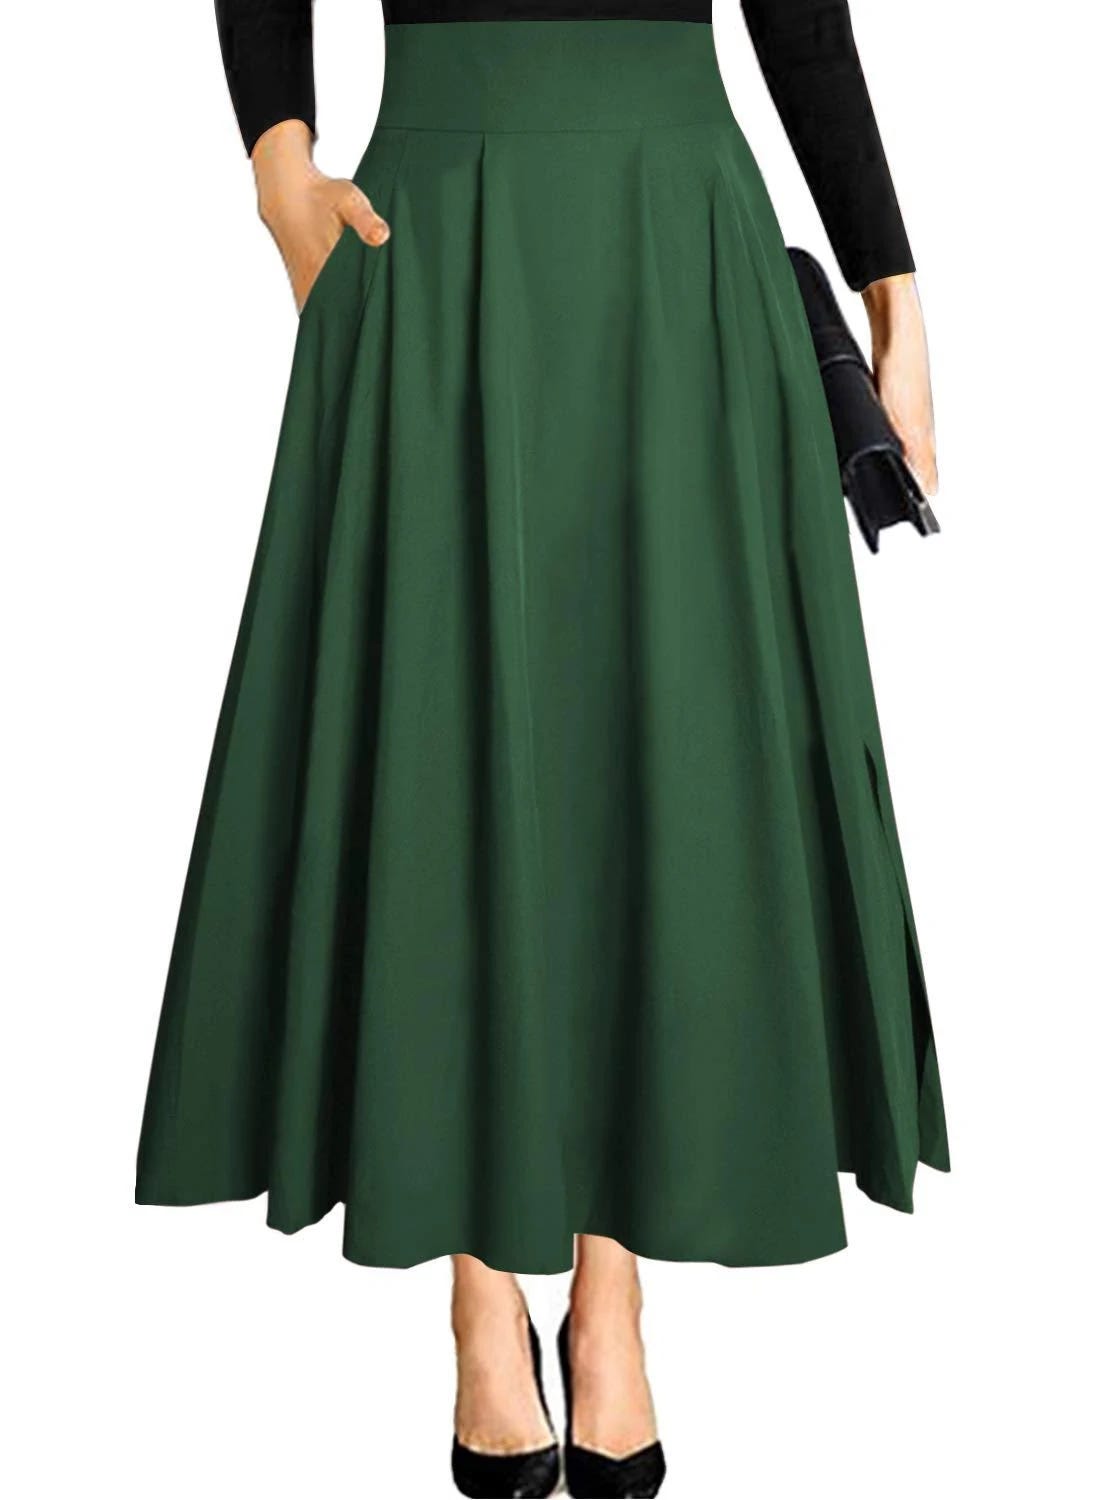 Maxi Skirt for Women with Pockets | Image